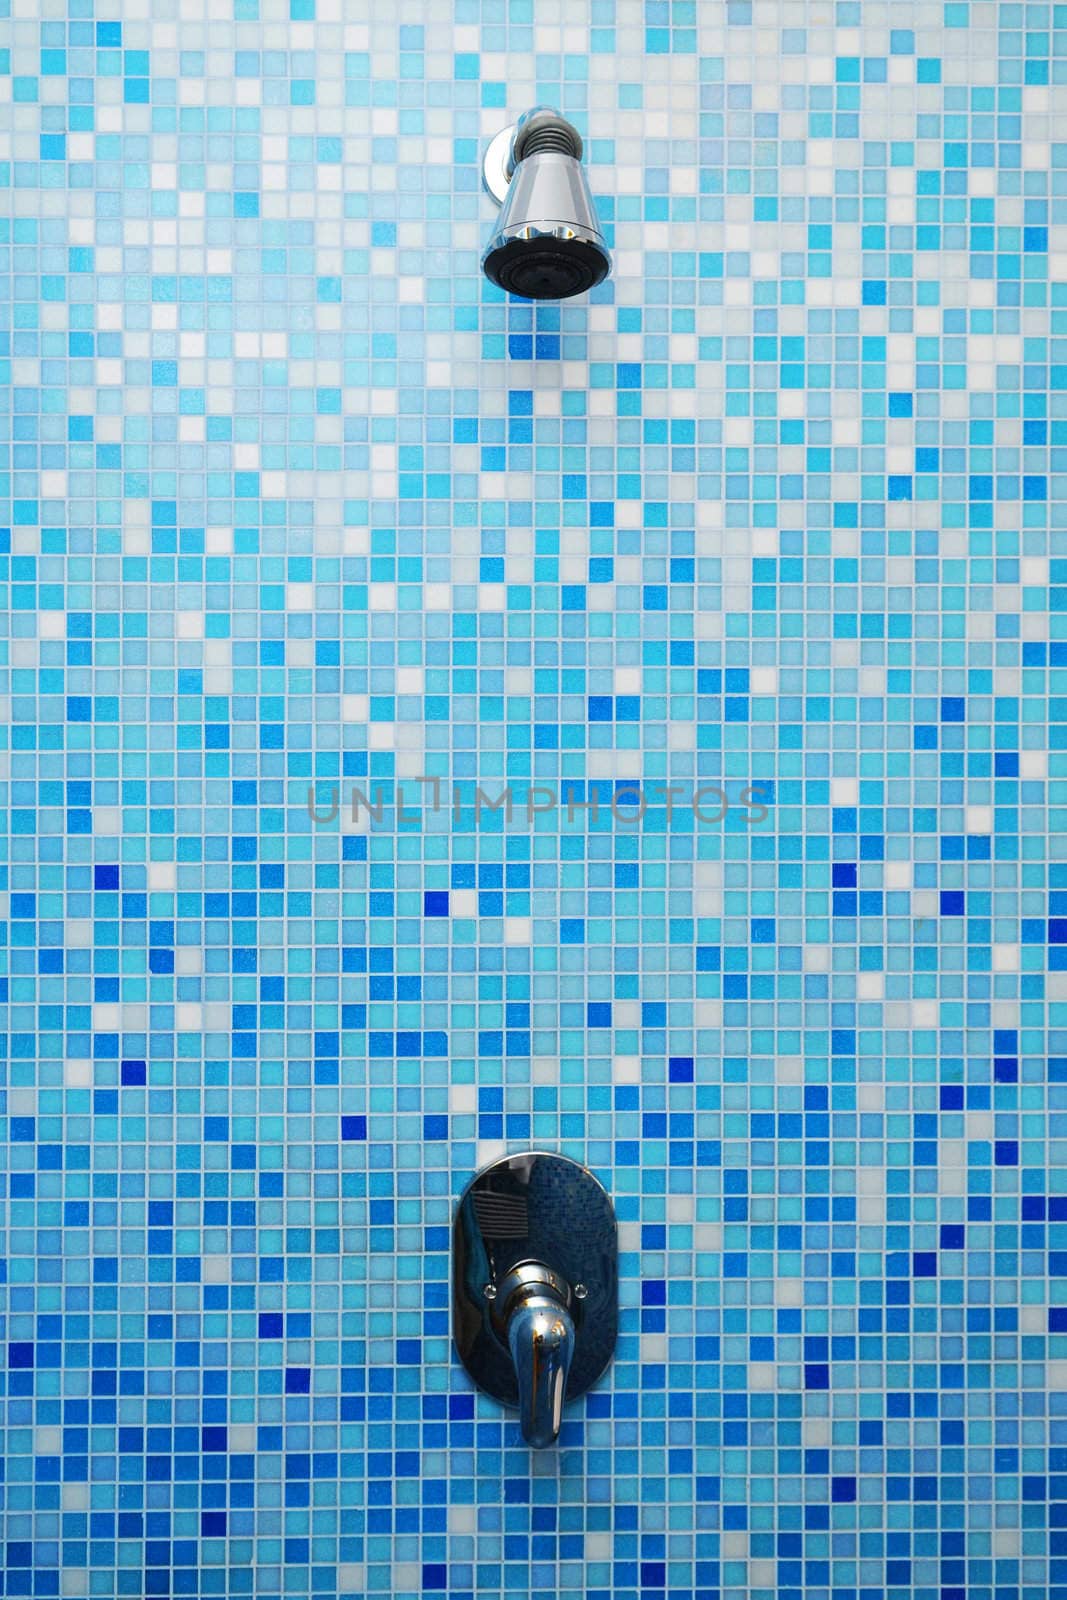 A shower on the blue